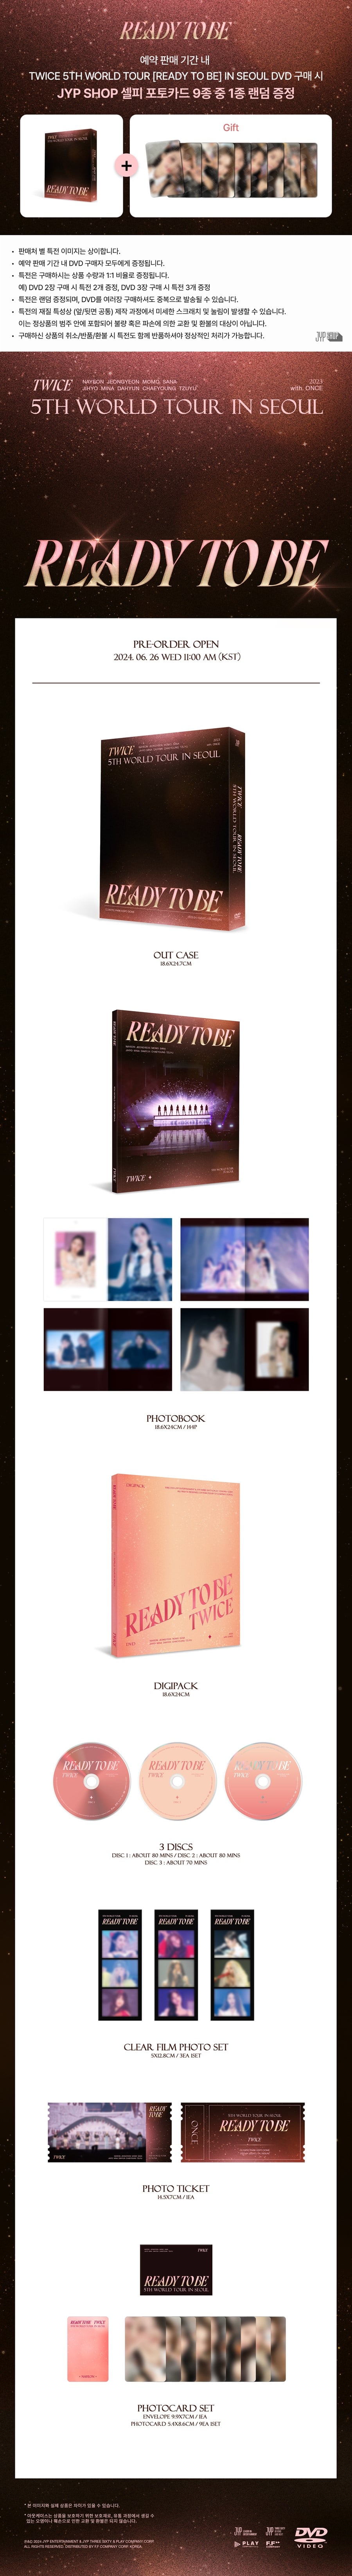 (Pre Order) Twice 5th World Tour Ready to Be in Seoul DVD with JYP Shop POB